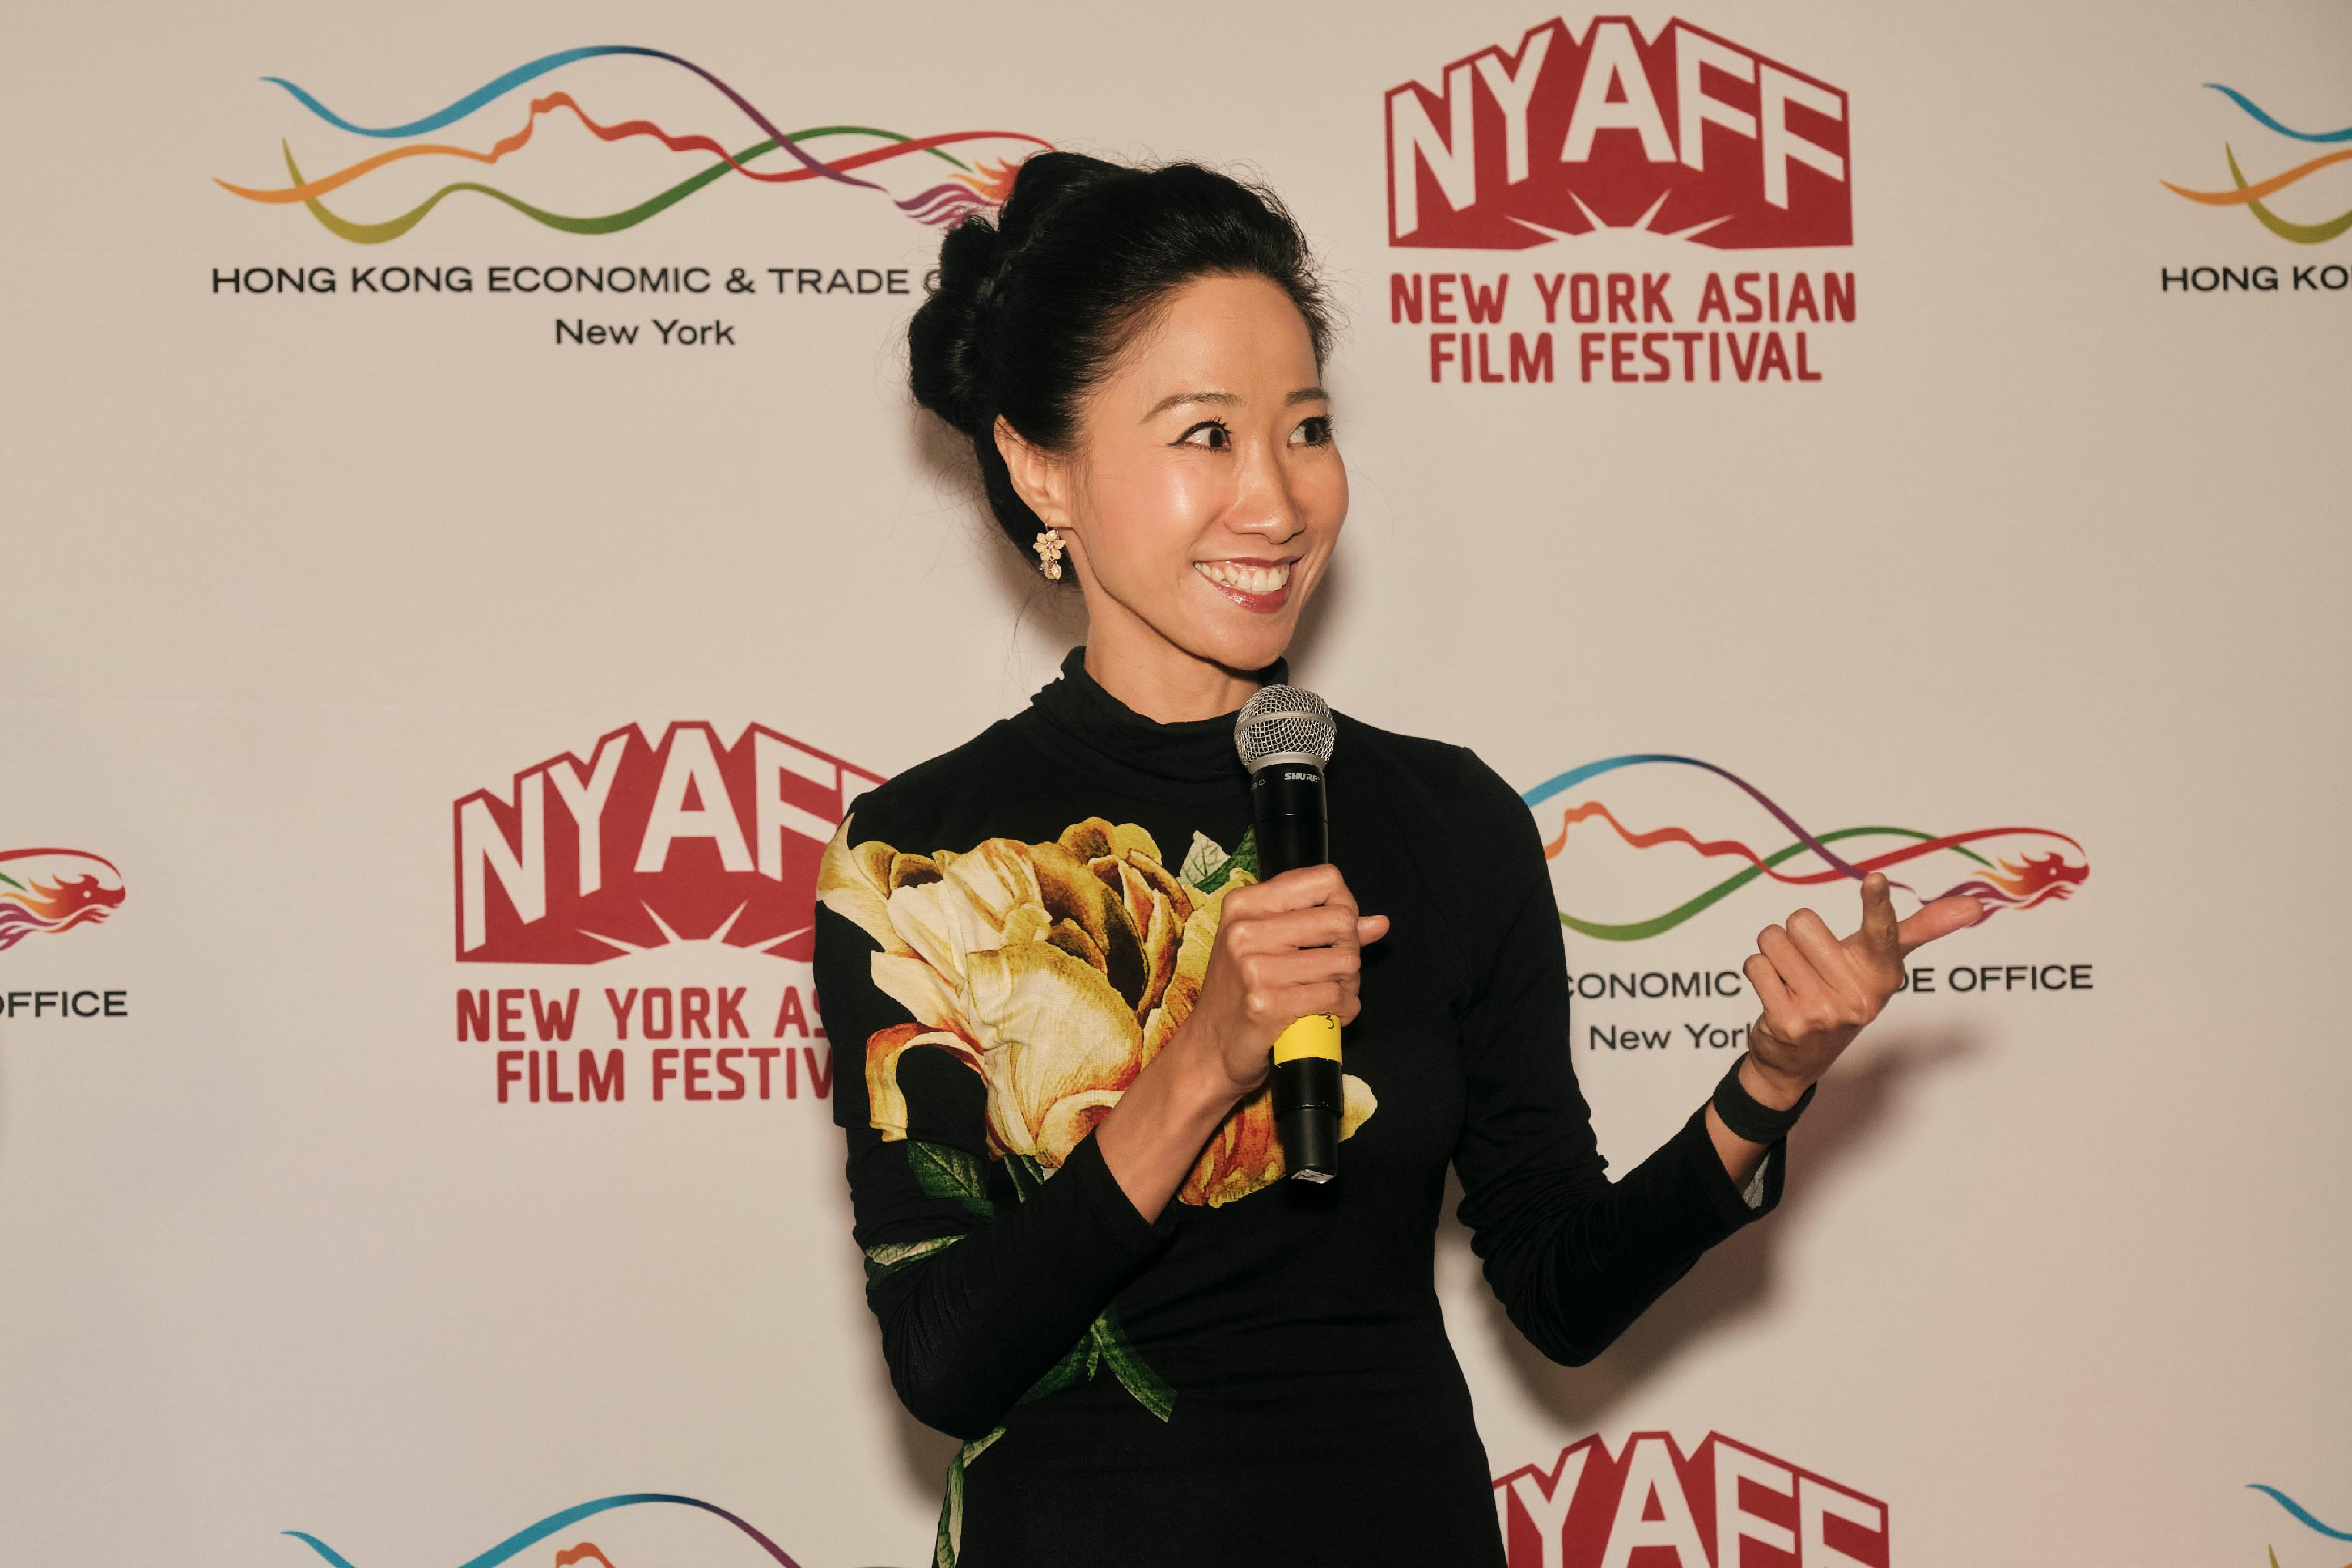 The Hong Kong Economic and Trade Office in New York (HKETONY) hosted a special reception honouring Hong Kong megastar Louis Koo, who was presented with the Extraordinary Star Asia Award for Exceptional Contribution to Asian Cinema by the New York Asian Film Festival on July 19 (New York time). Photo shows the Director of the HKETONY, Ms Candy Nip, welcoming guests at the reception.